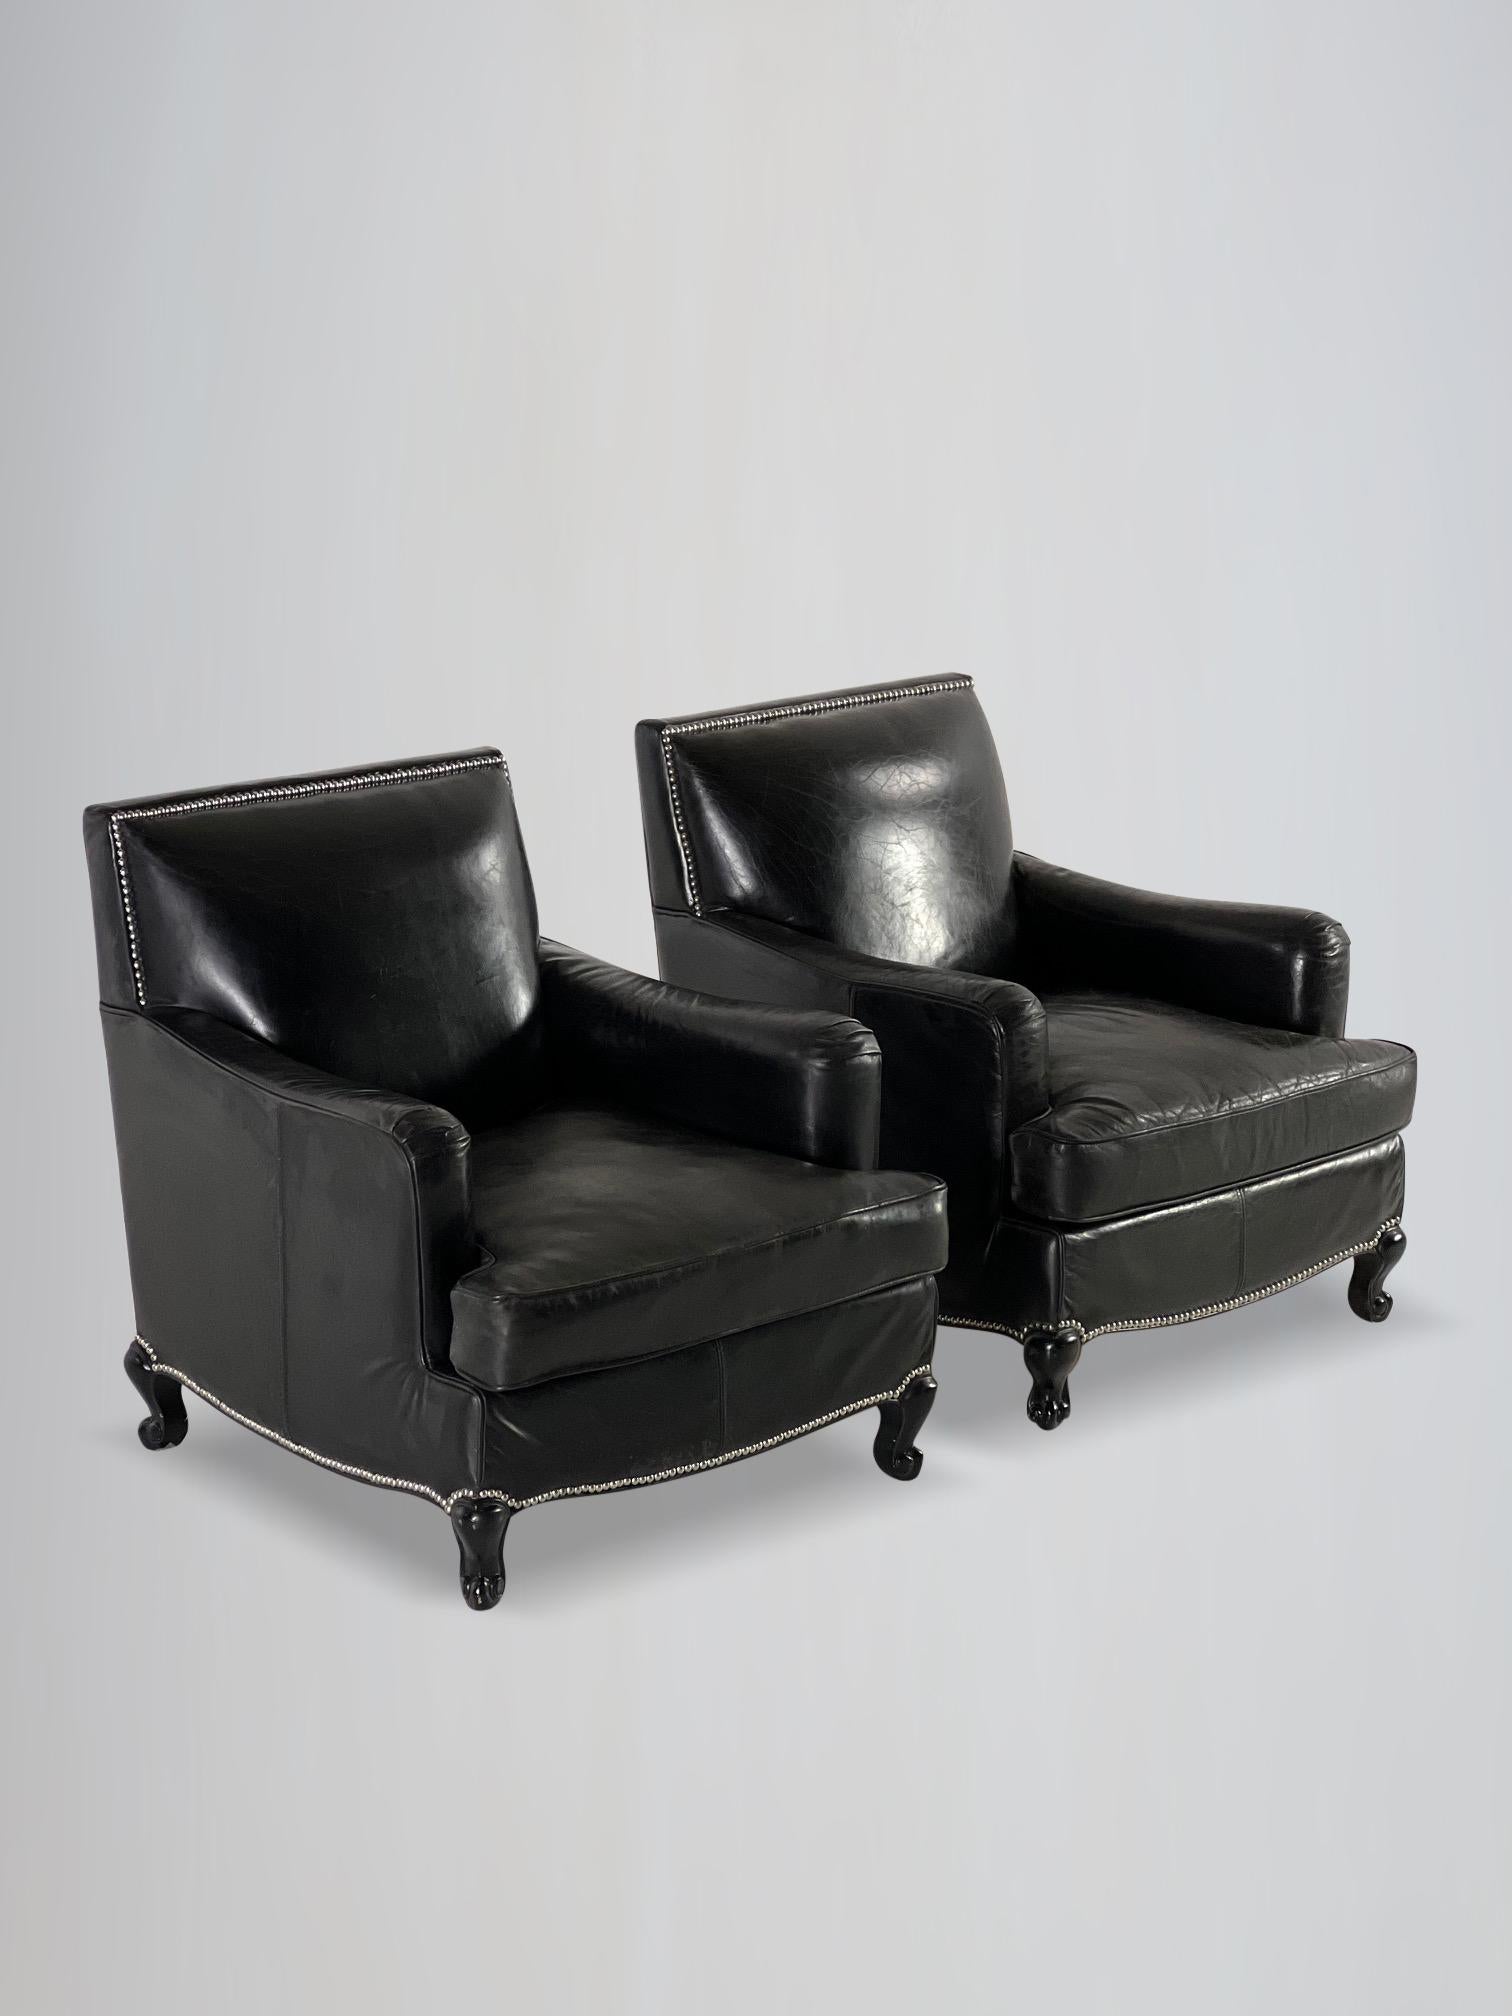 A stunning pair of 20th century French quality leather and ebonised wooden upholstered black leather club armchairs. Retaining the original leather and studs, square back, having shaped arms with deep and roomy proportions sitting, loose feathered